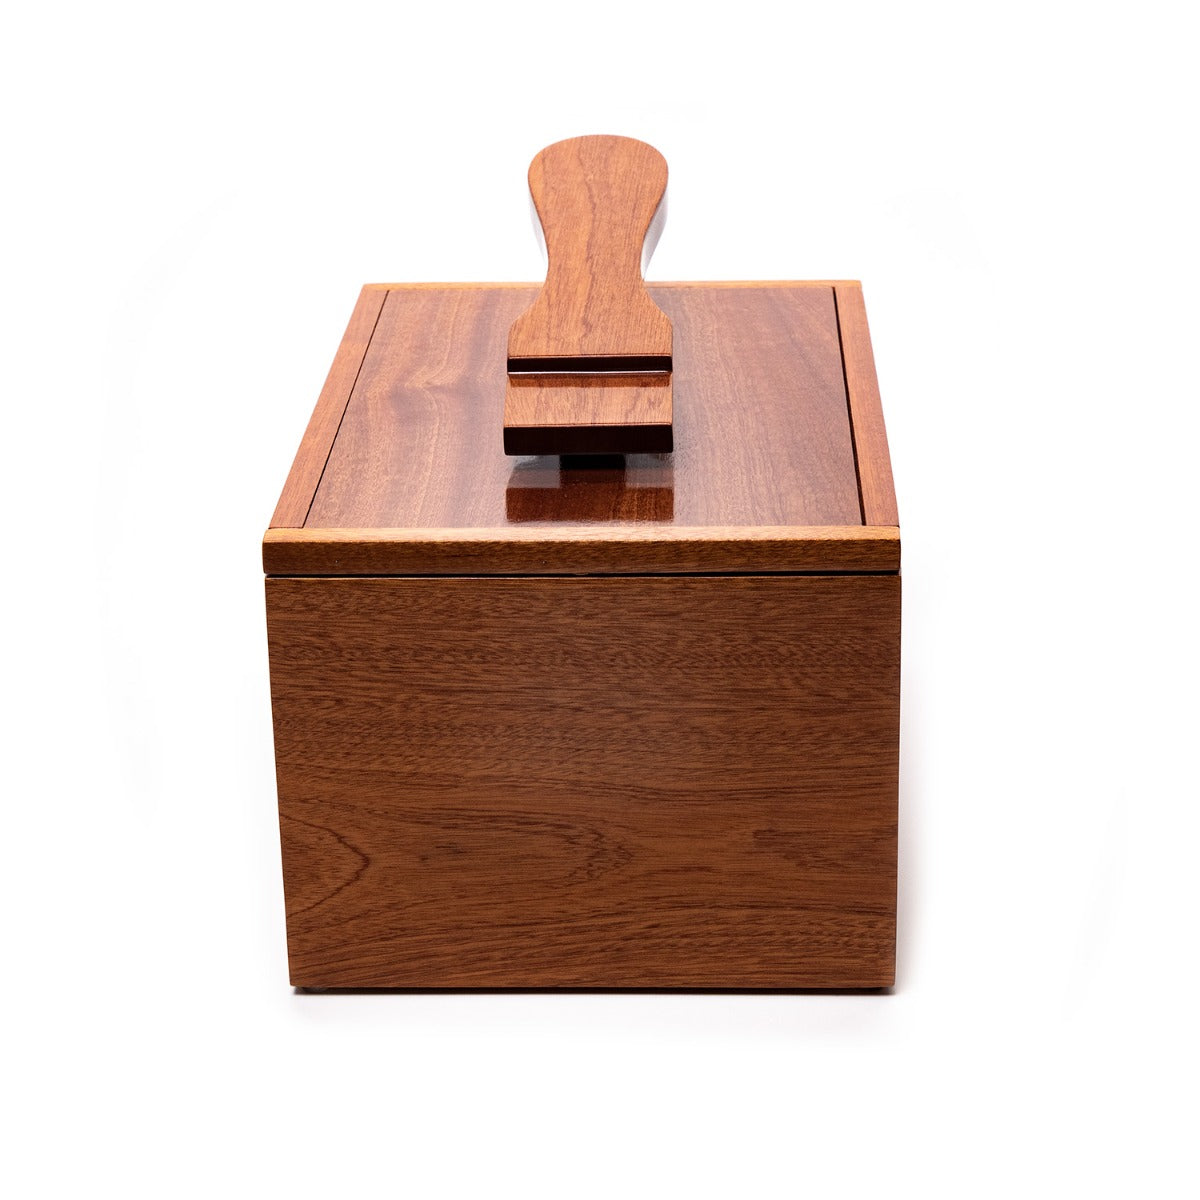 A handcrafted Deluxe Walnut Shoeshine Valet with a handle on it, made from solid walnut wood, by KirbyAllison.com.